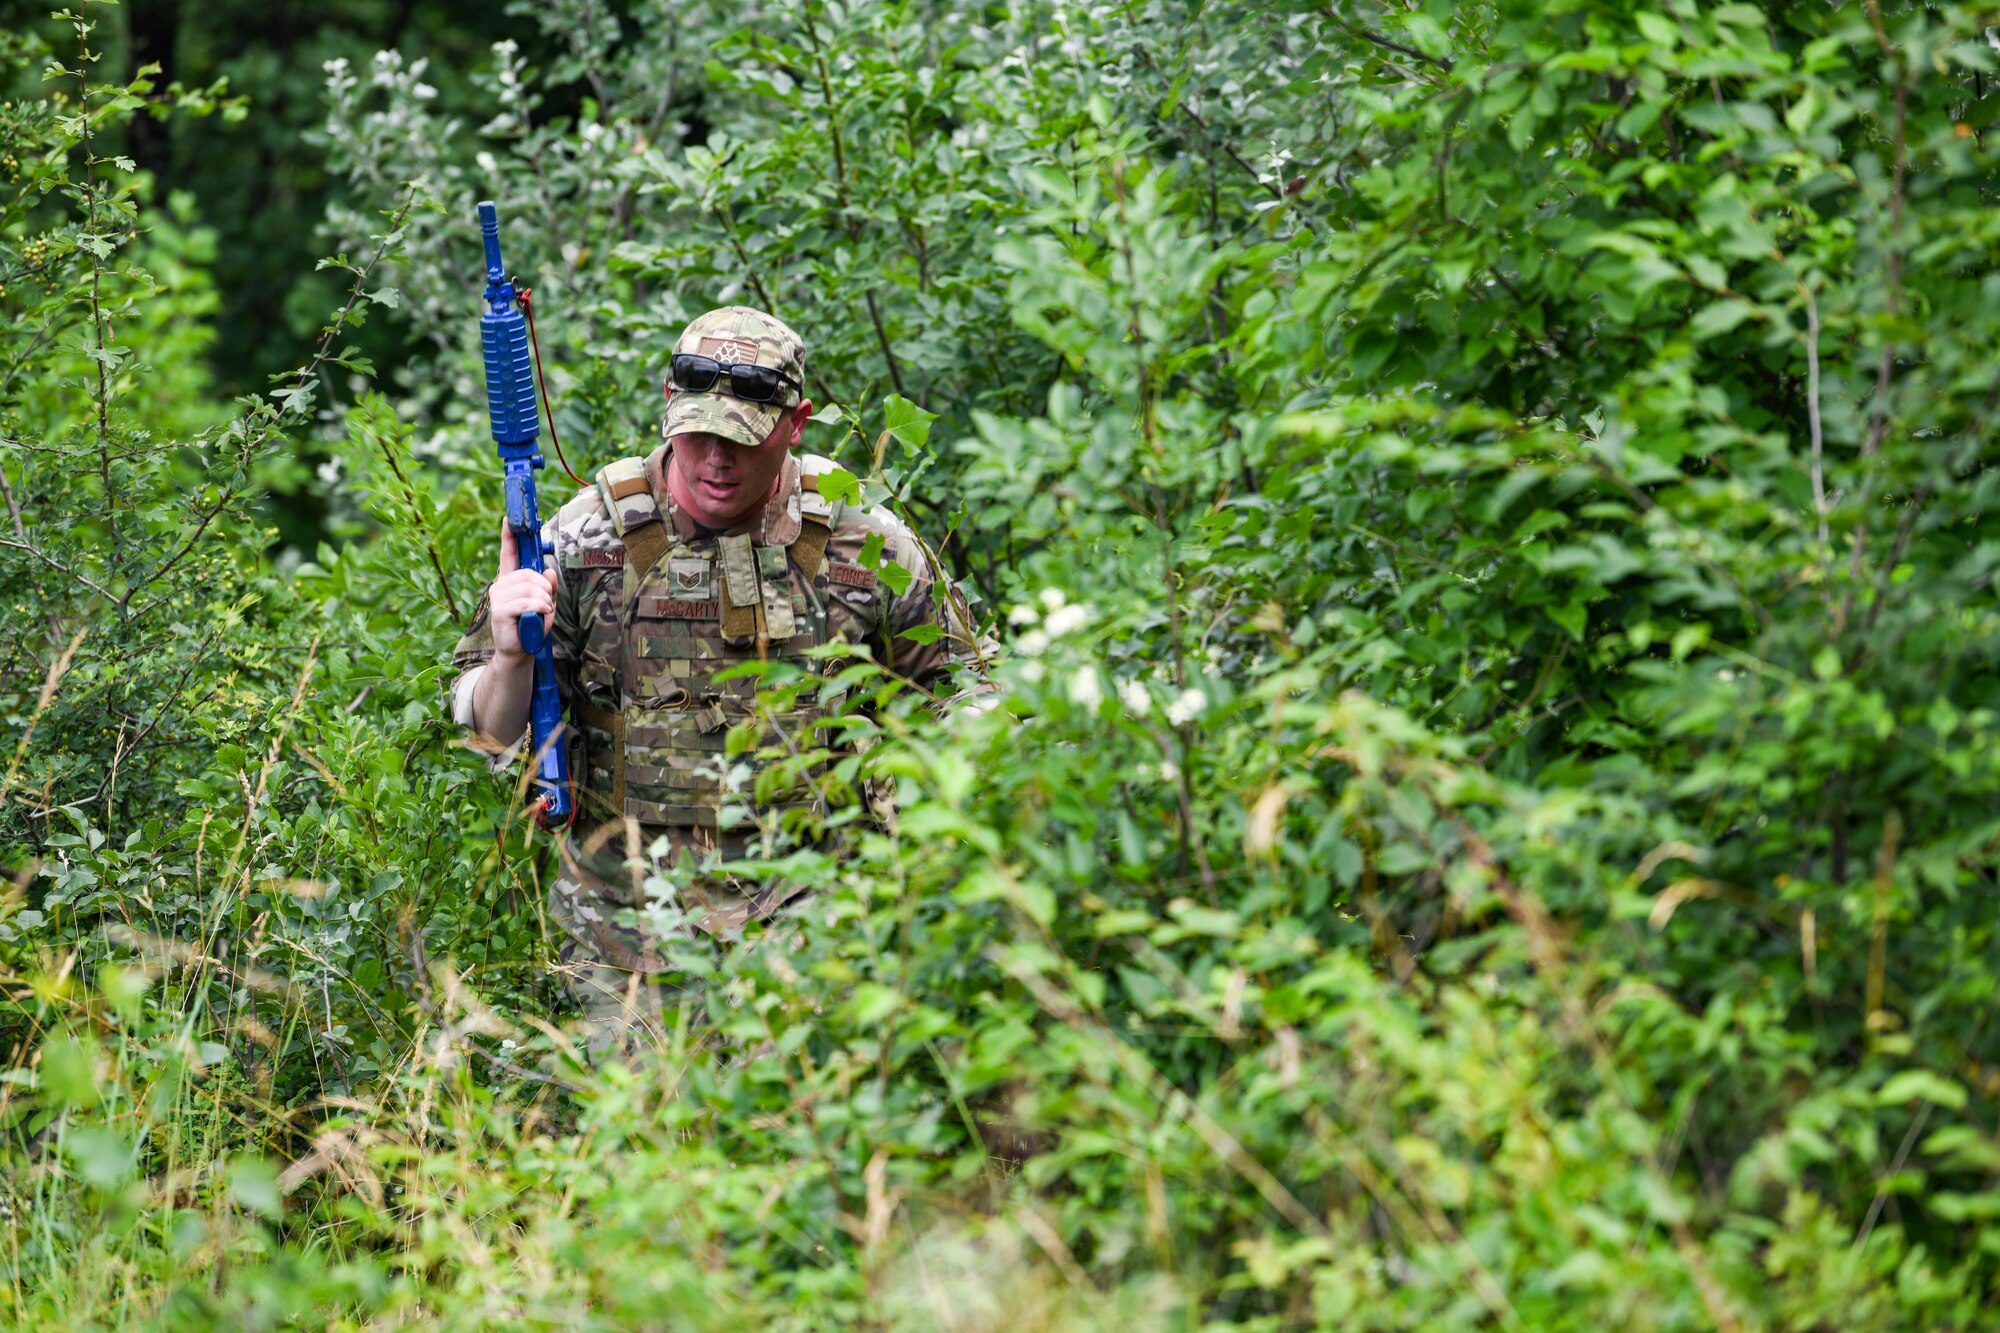 U.S. Air Force Staff Sgt. Matthew McCarty, 31st Security Forces Squadron military working dog handler searched for a simulated downed pilot during Operation Porcupine, June 30, 2020 at Osoppo, Italy. McCarty acted as the opposing force during Operation Porcupine which is a unique exercise that tests the diverse capabilities of the 31st Operations Group, combining efforts from the 56th and 57th Rescue Squadron, the 510th Fighter Squadron, the 606th Air Control Squadron, and the 31st Security Forces Squadron for the rescue of a simulated downed pilot. (U.S. Air Force photo by Airman 1st Class Ericka A. Woolever)